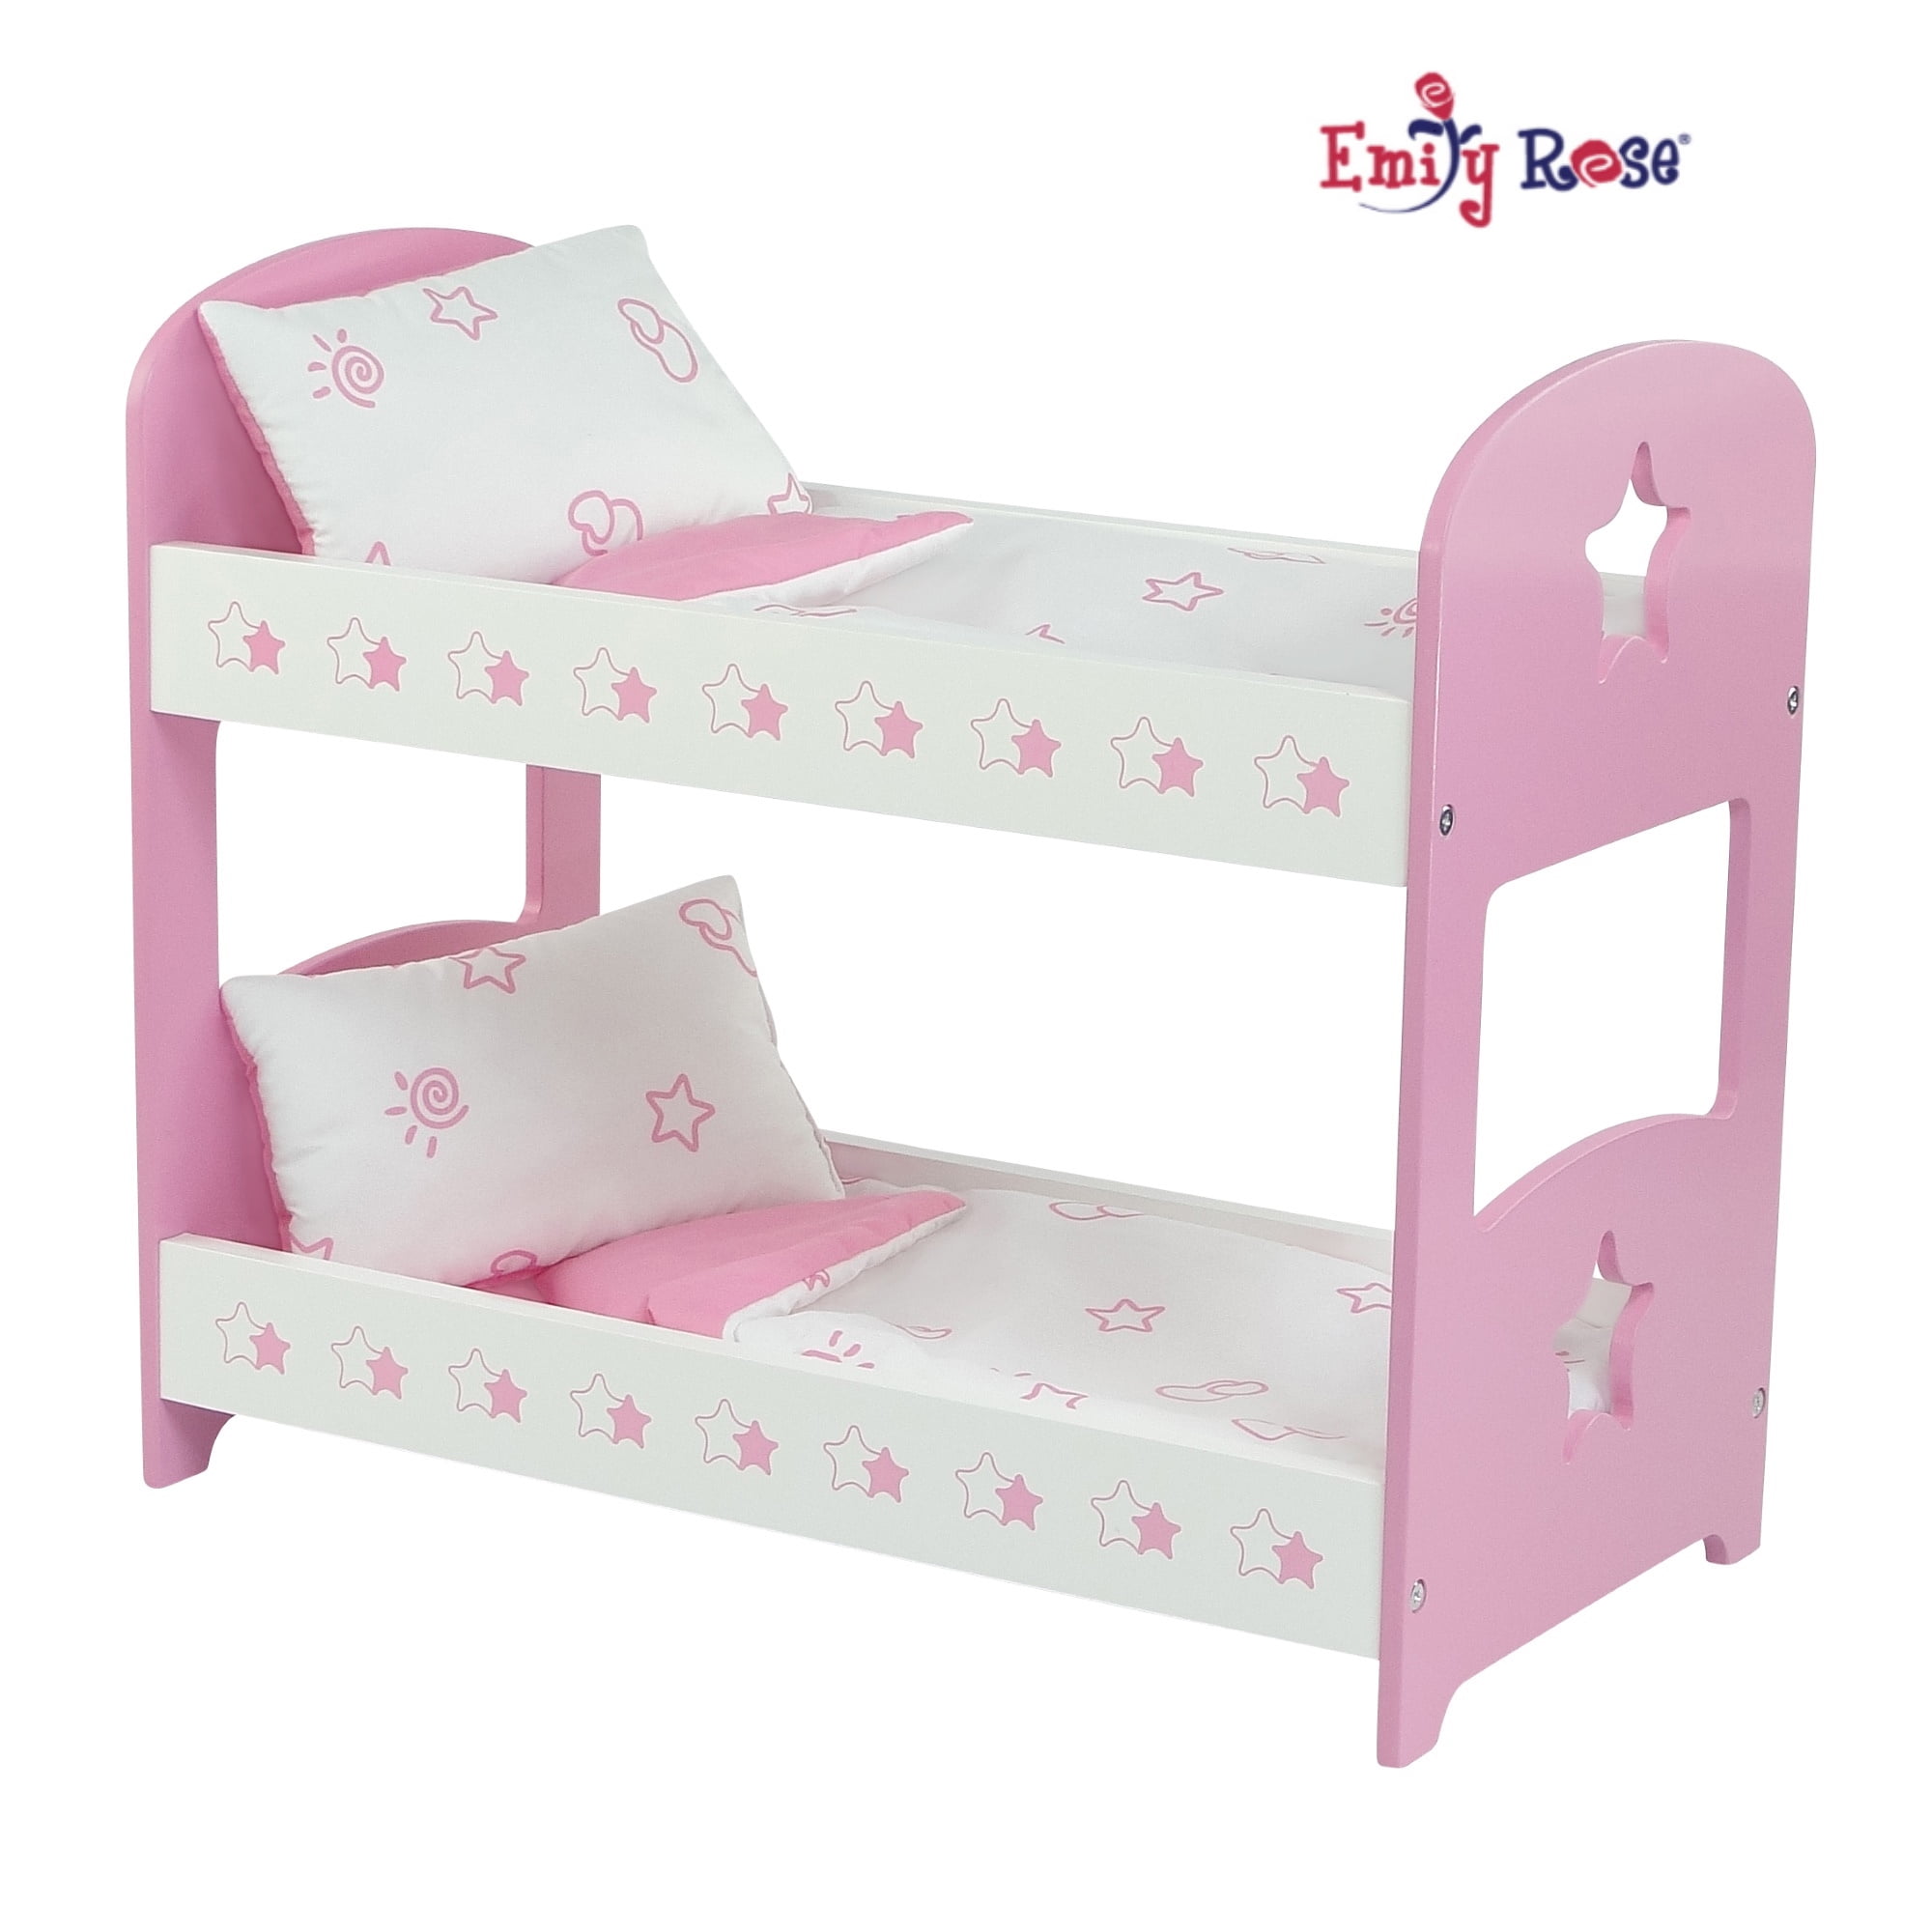 18 Inch Doll Bunk Bed Furniture, Doll Bunk Bed Bedding